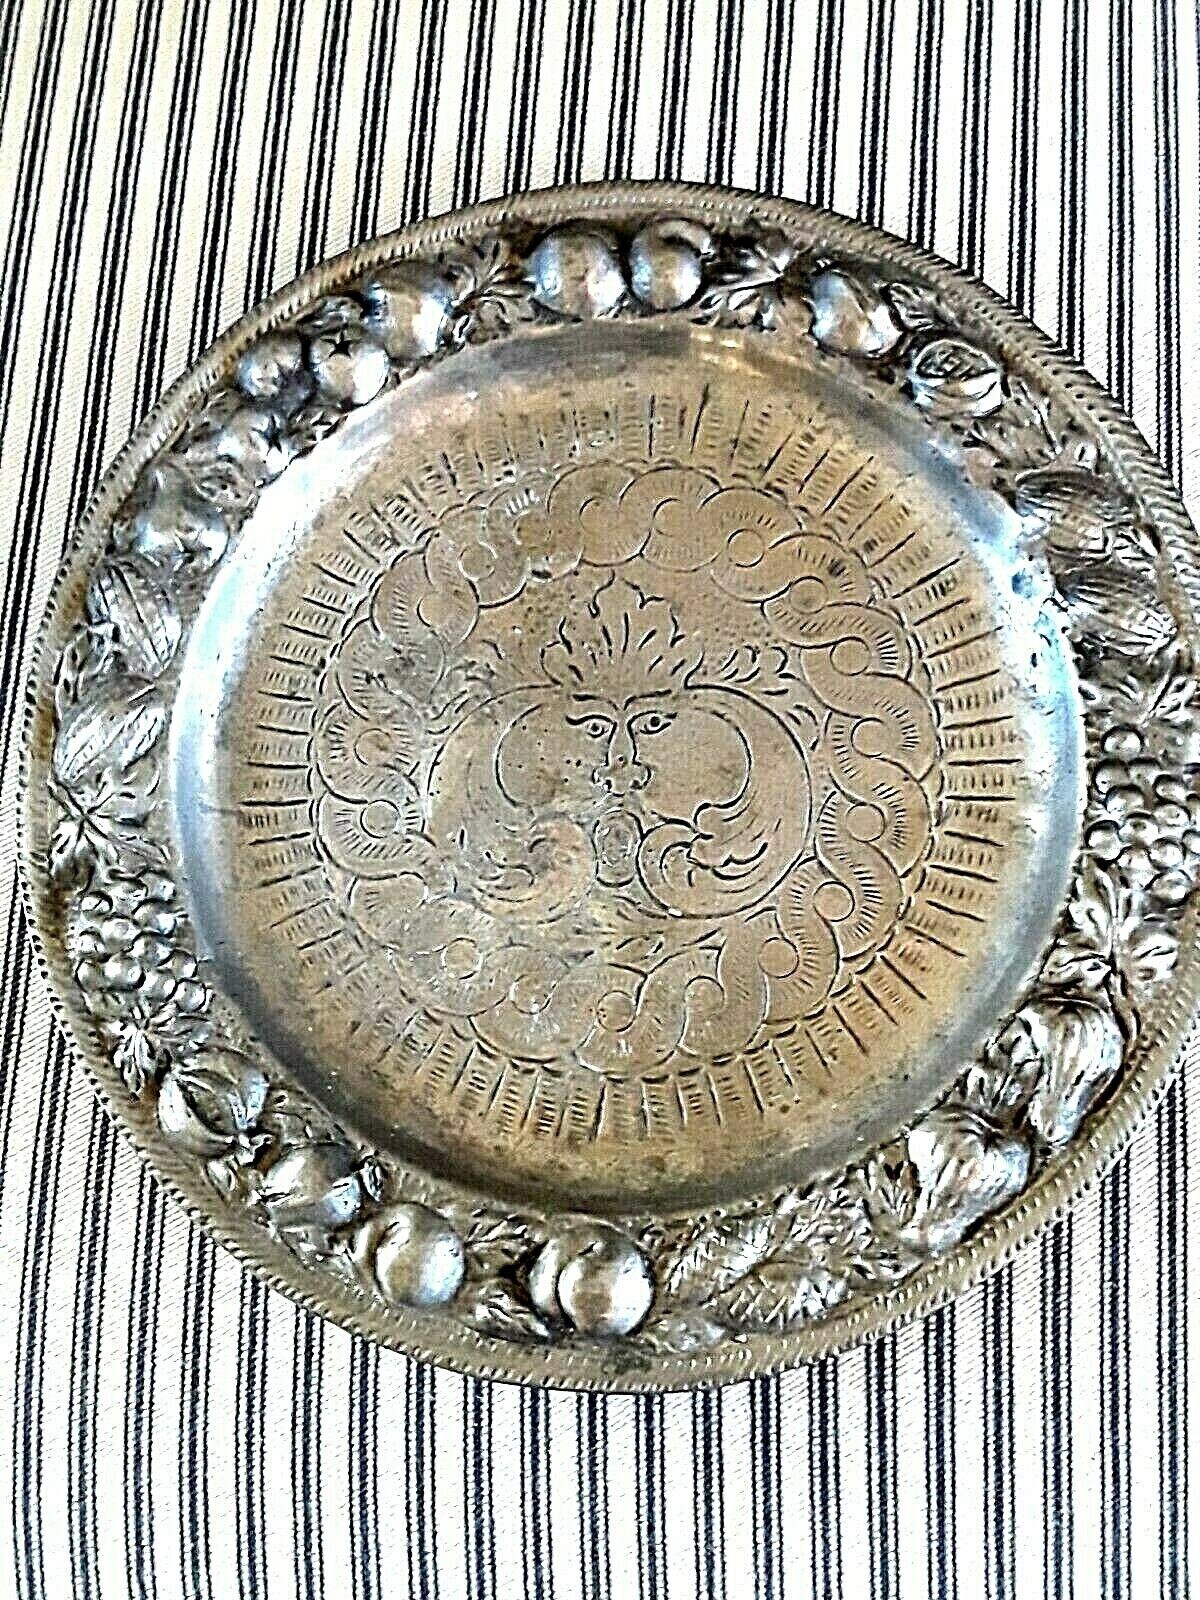 Interesting Detailed Antique1800s European Pewter Plate - North Wind Motif